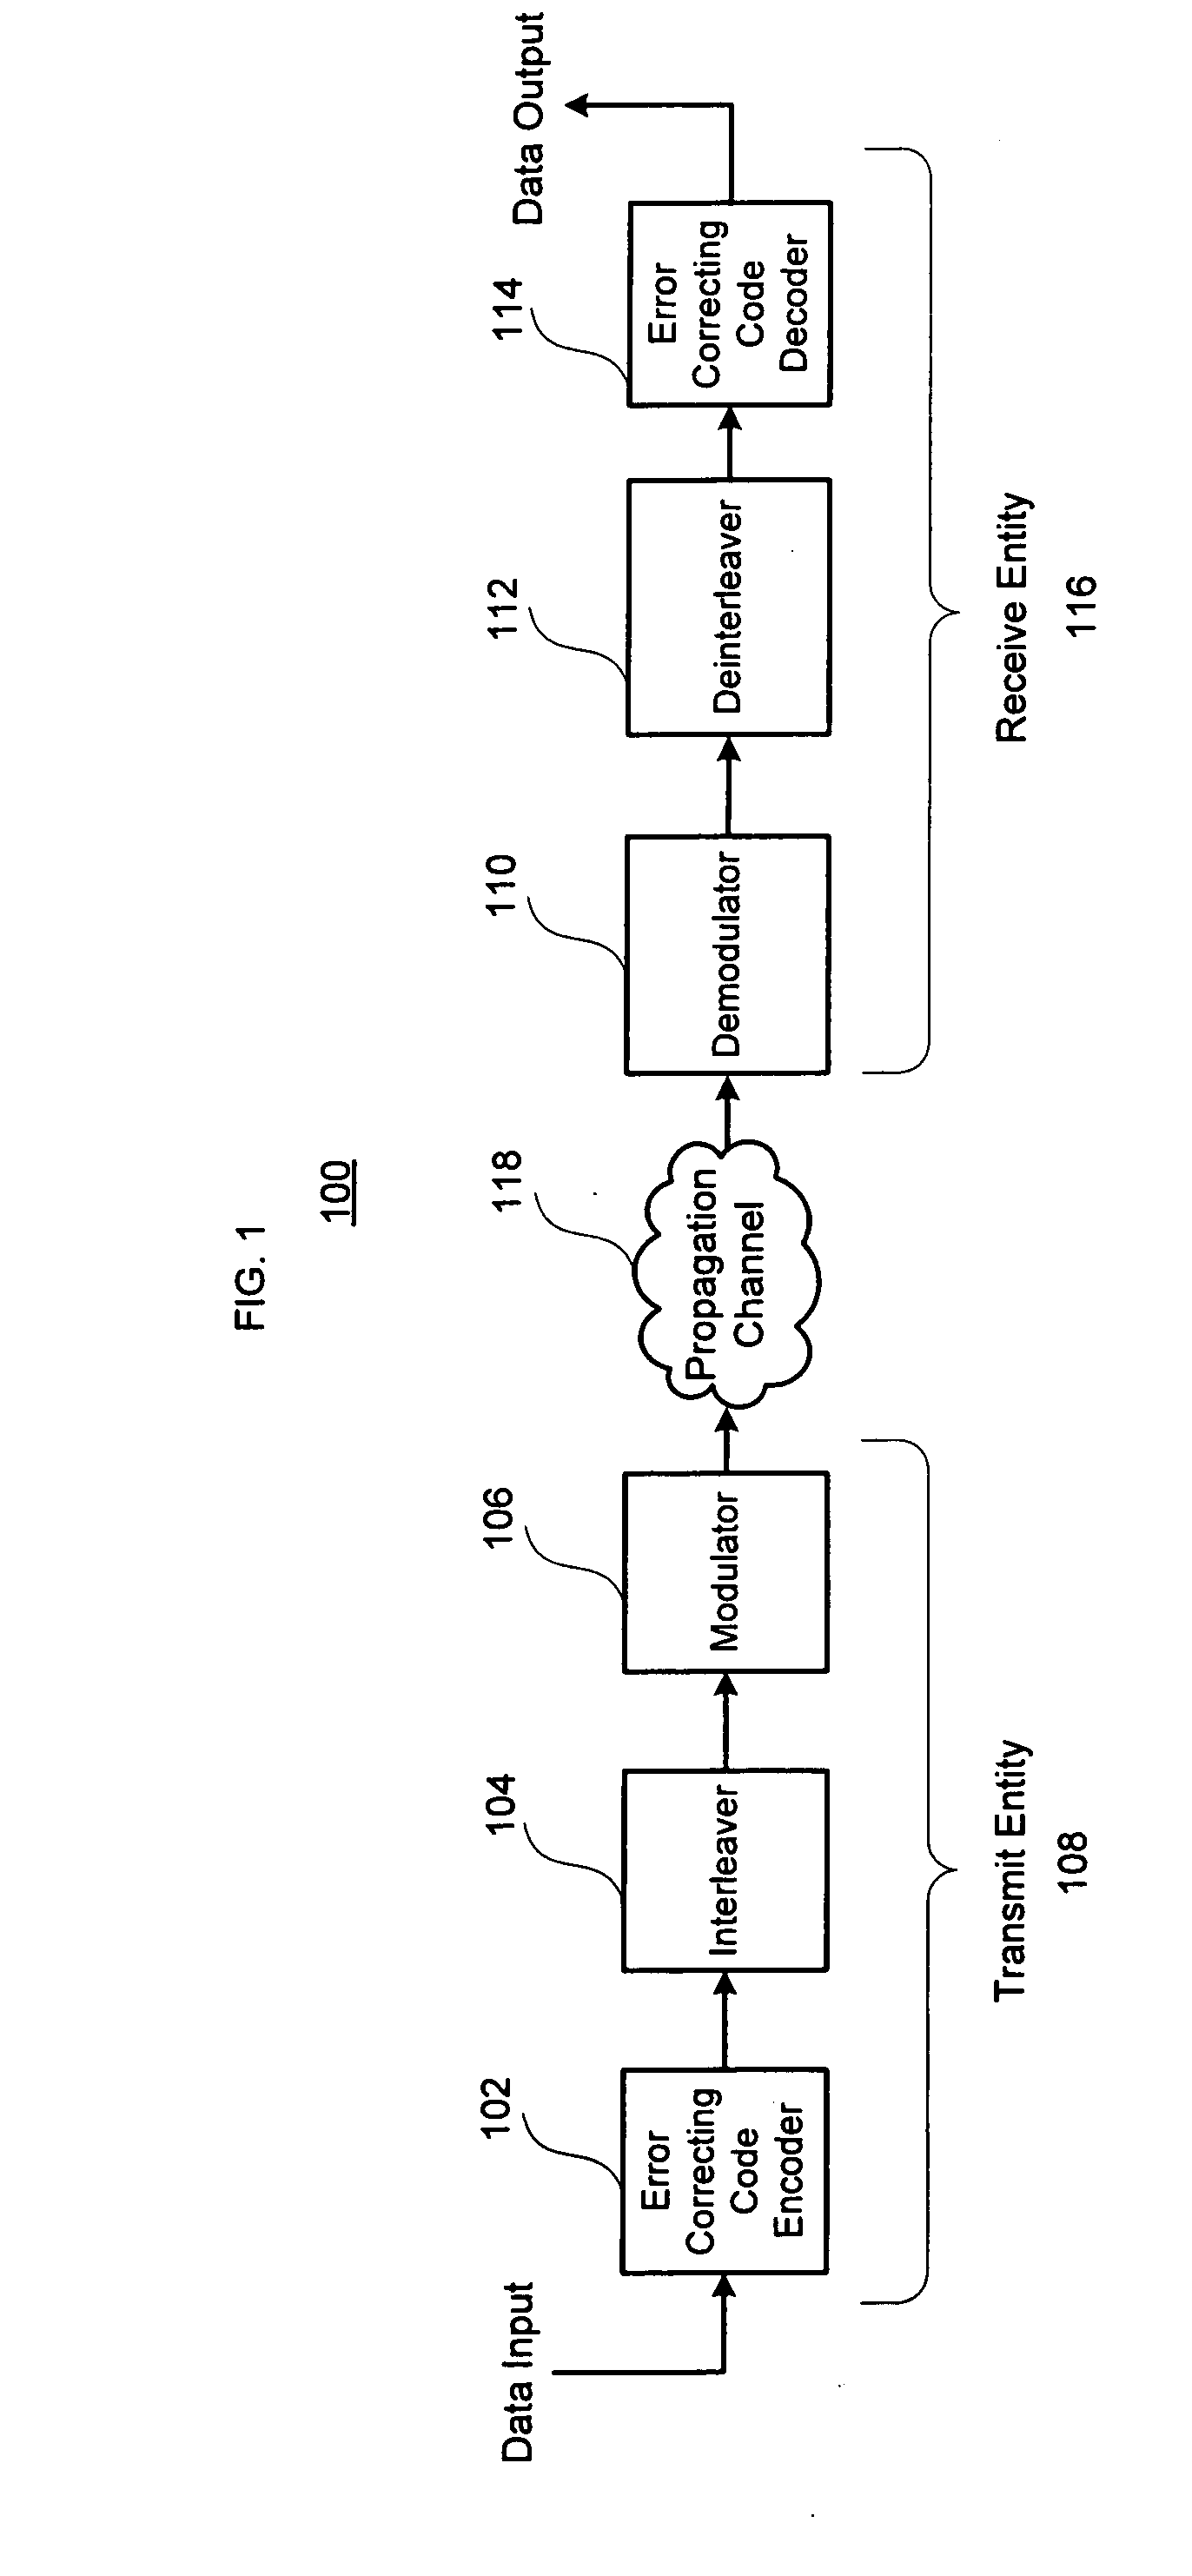 Method and apparatus to improve information decoding when its characteristics are known a priori